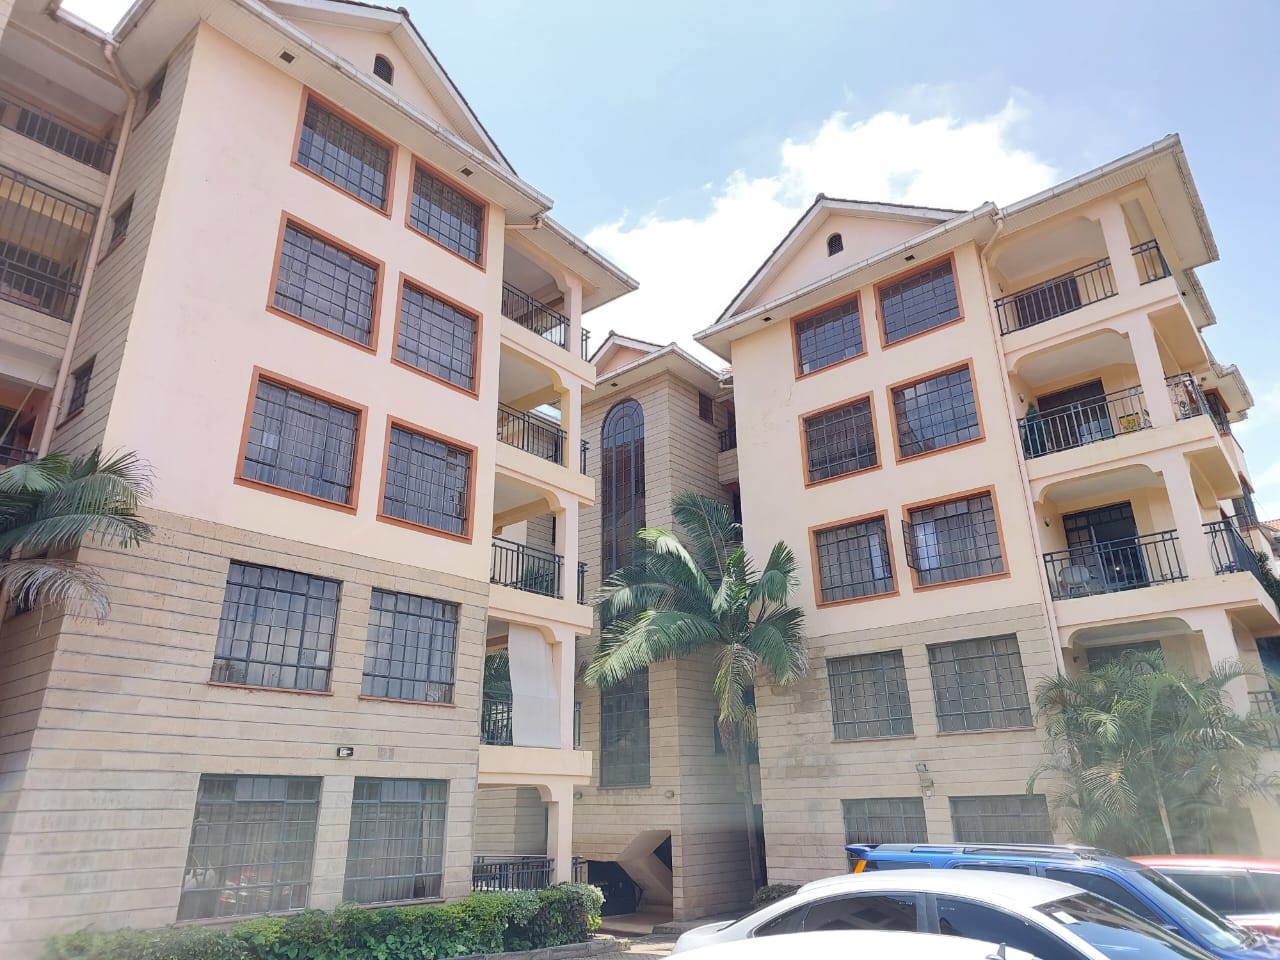 Kilimani Very Big, Spacious 3 Bedroom Apartment Plus DSQ. Near State House. In a Compound of only 20 Units. Kshs. 20 Million Negotiable. Musilli Homes